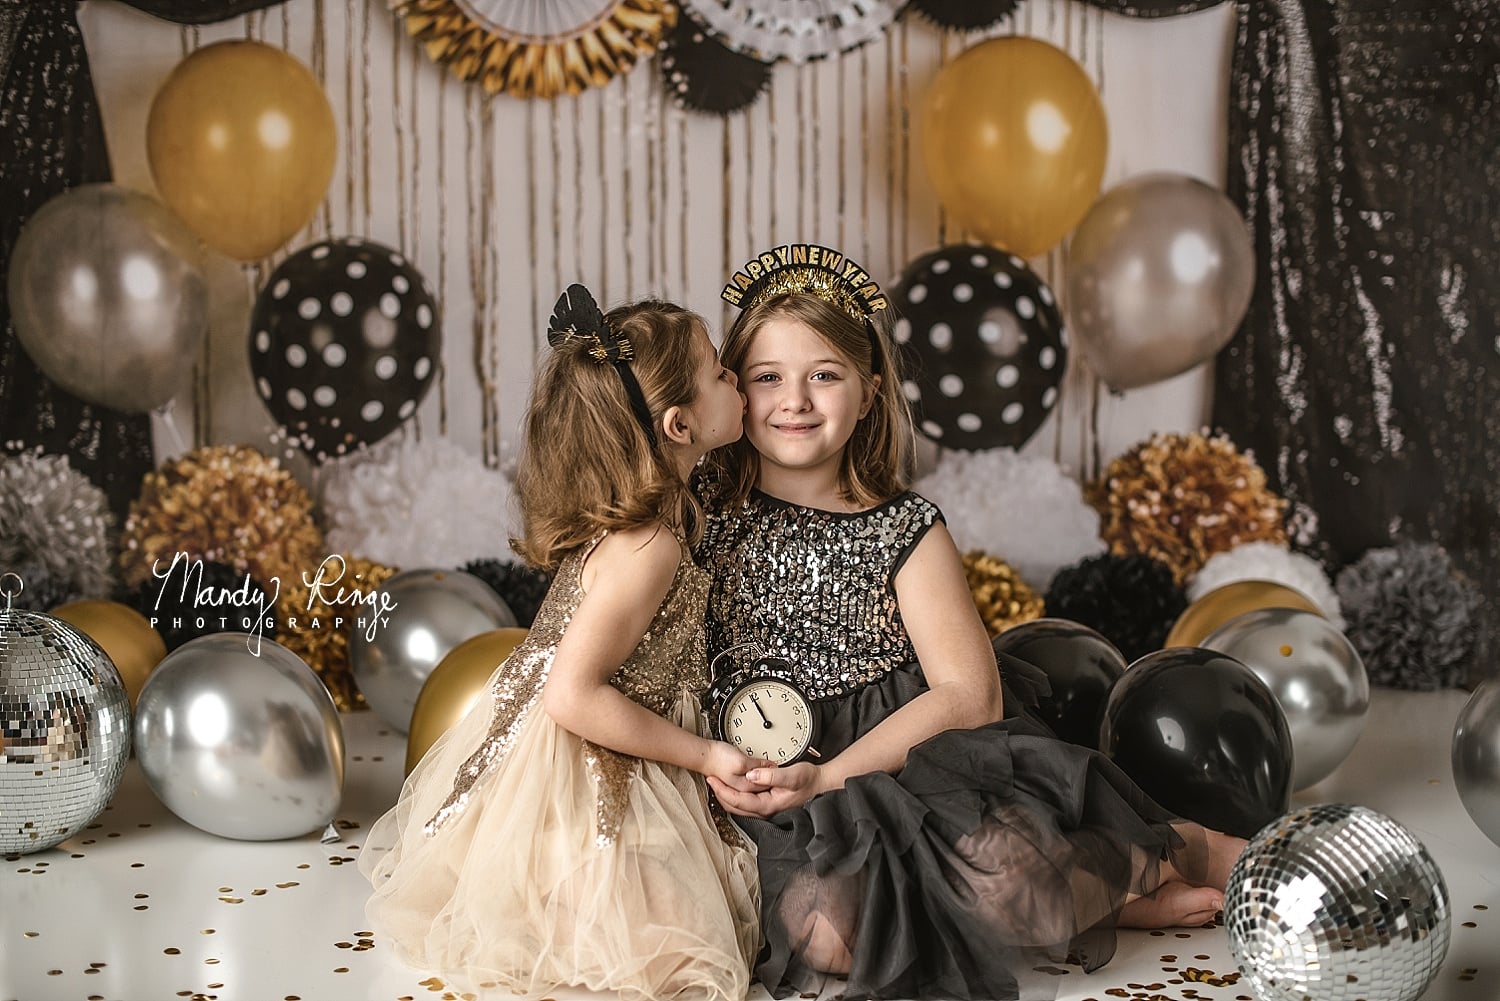 Kate Black and Gold New Year Eve Party Backdrop Designed By Mandy Ringe Photography - Kate Backdrop